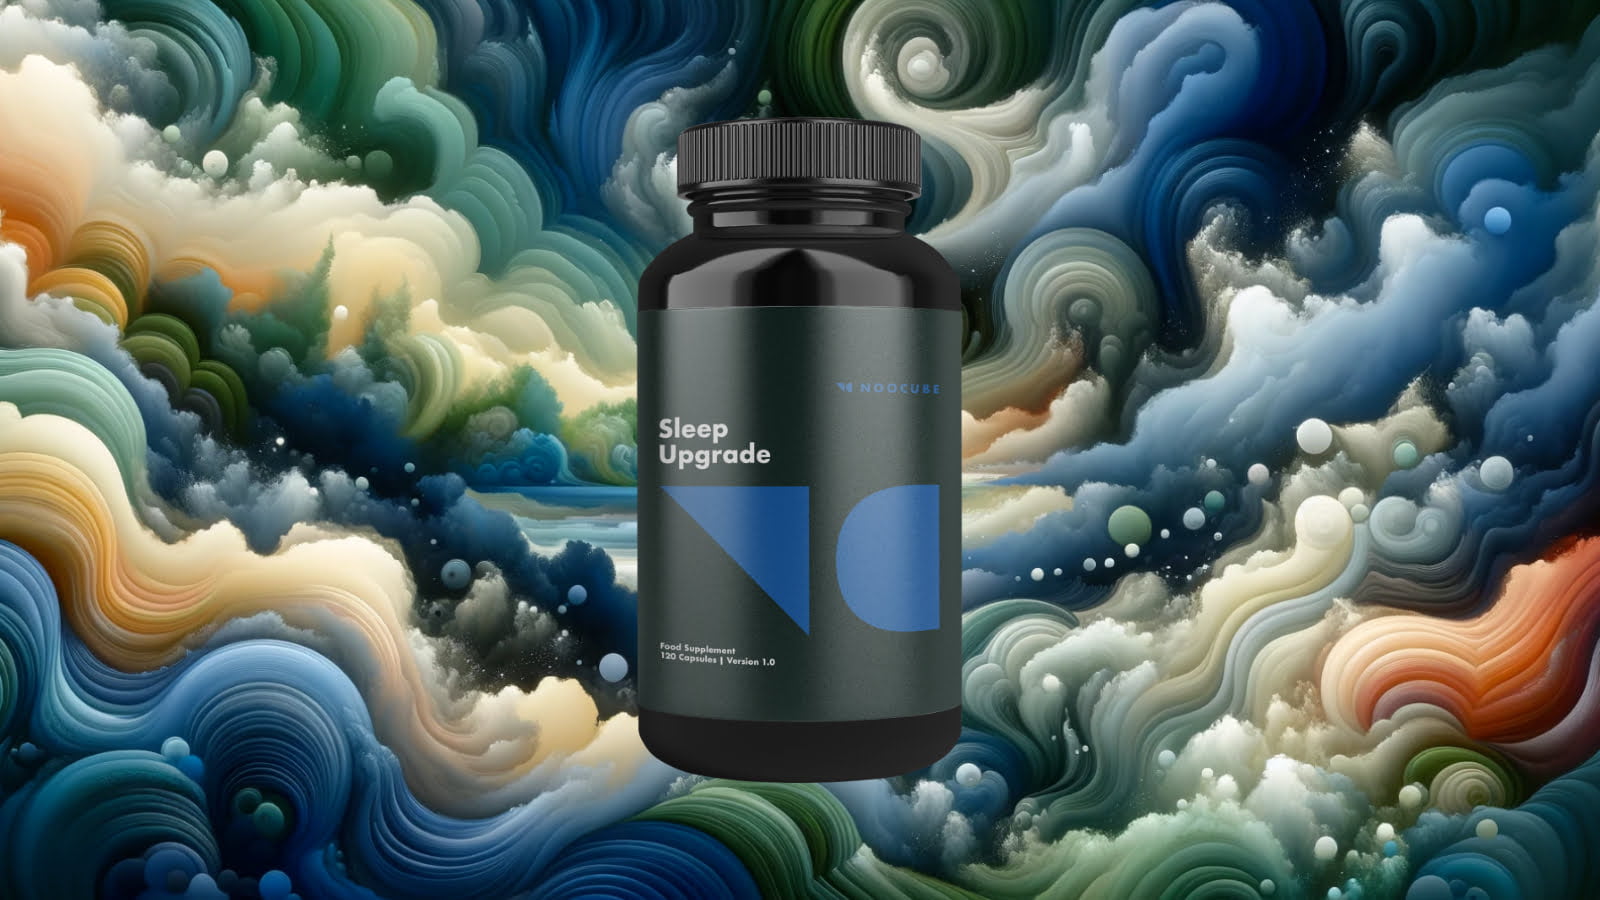 Review of NooCube Sleep Upgrade highlighting its benefits and natural ingredients for enhanced sleep and mental clarity.